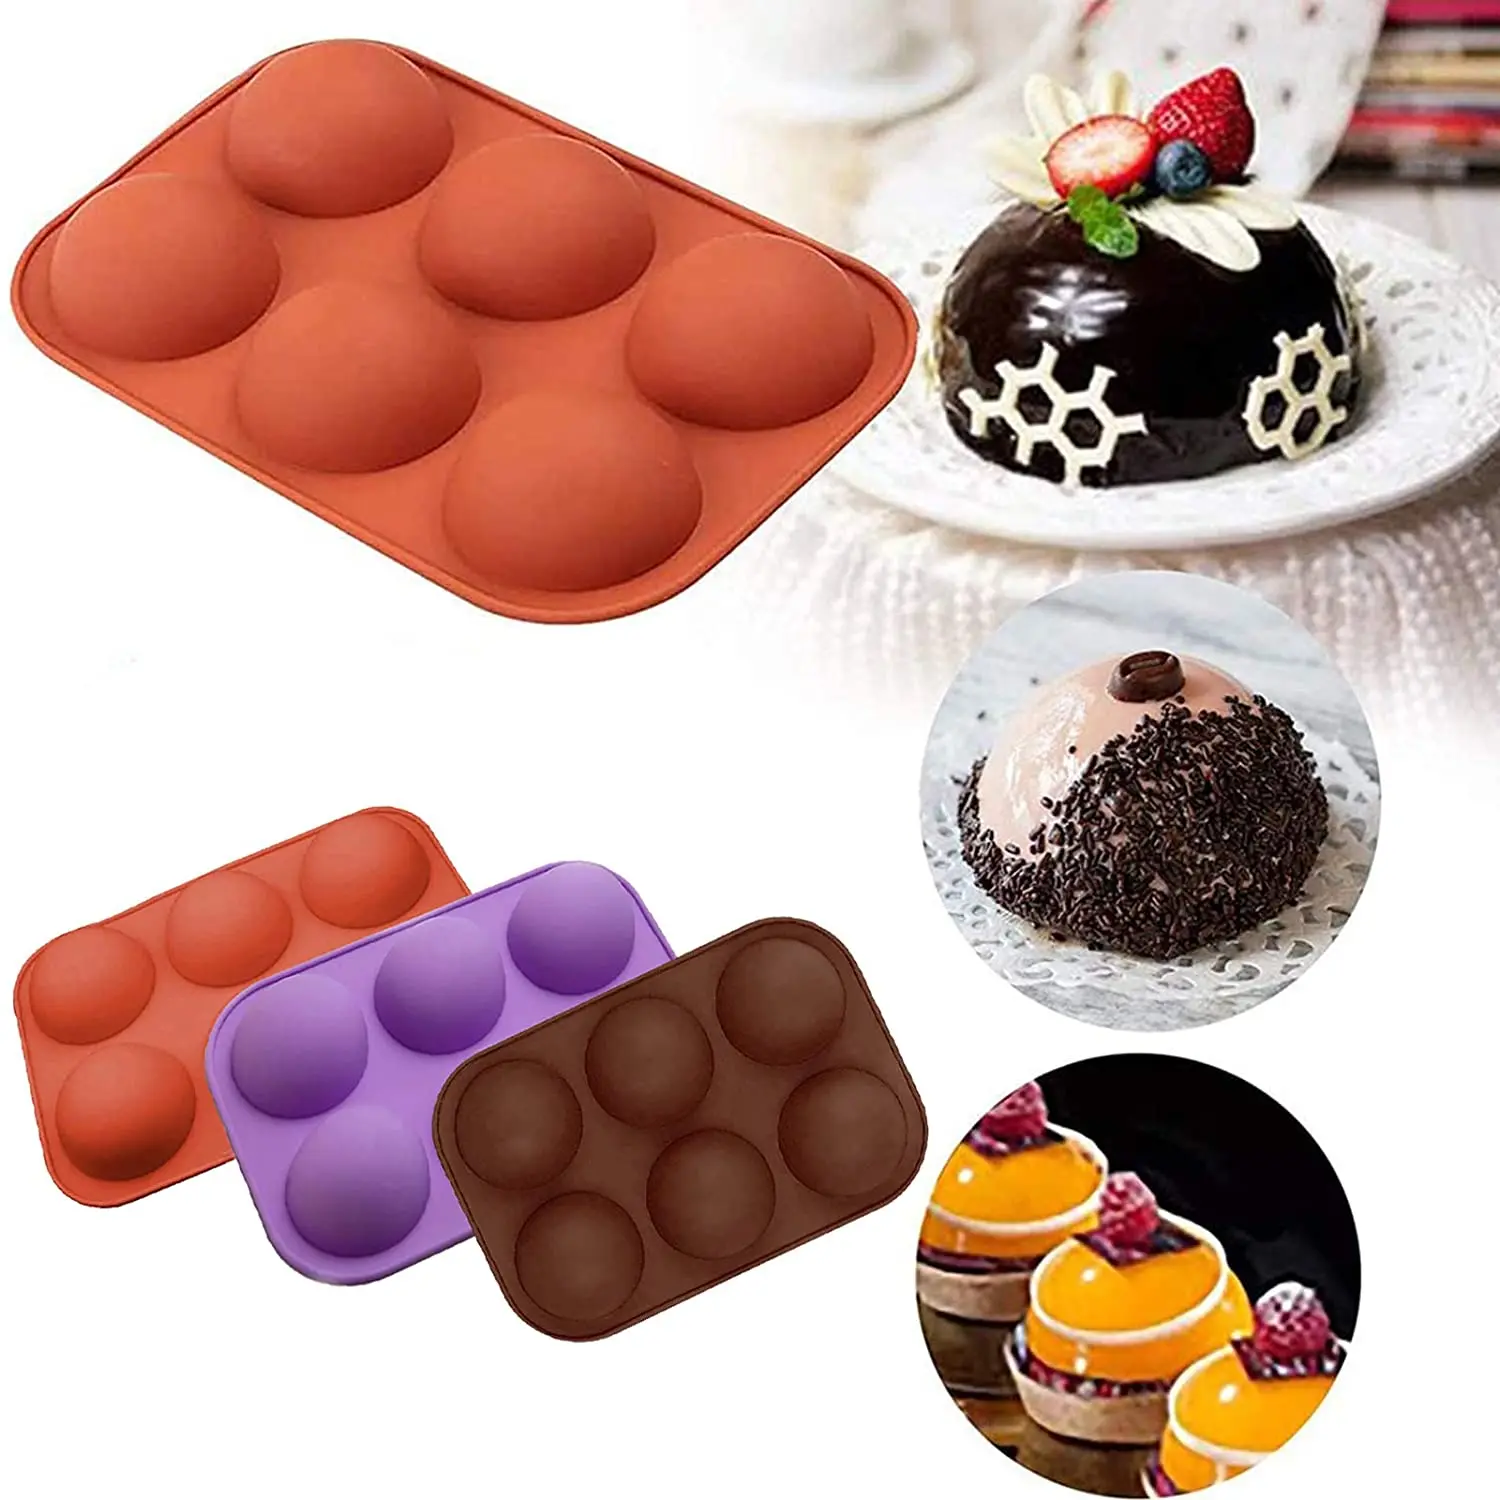 Dome Mousse Baking Mold for Making Chocolate Cake Non Stick Round Shape BPA Free Cupcake Baking Pan Jelly Hot Chocolate Bomb Mold 6 Holes Medium Semi Sphere Silicone Mold 